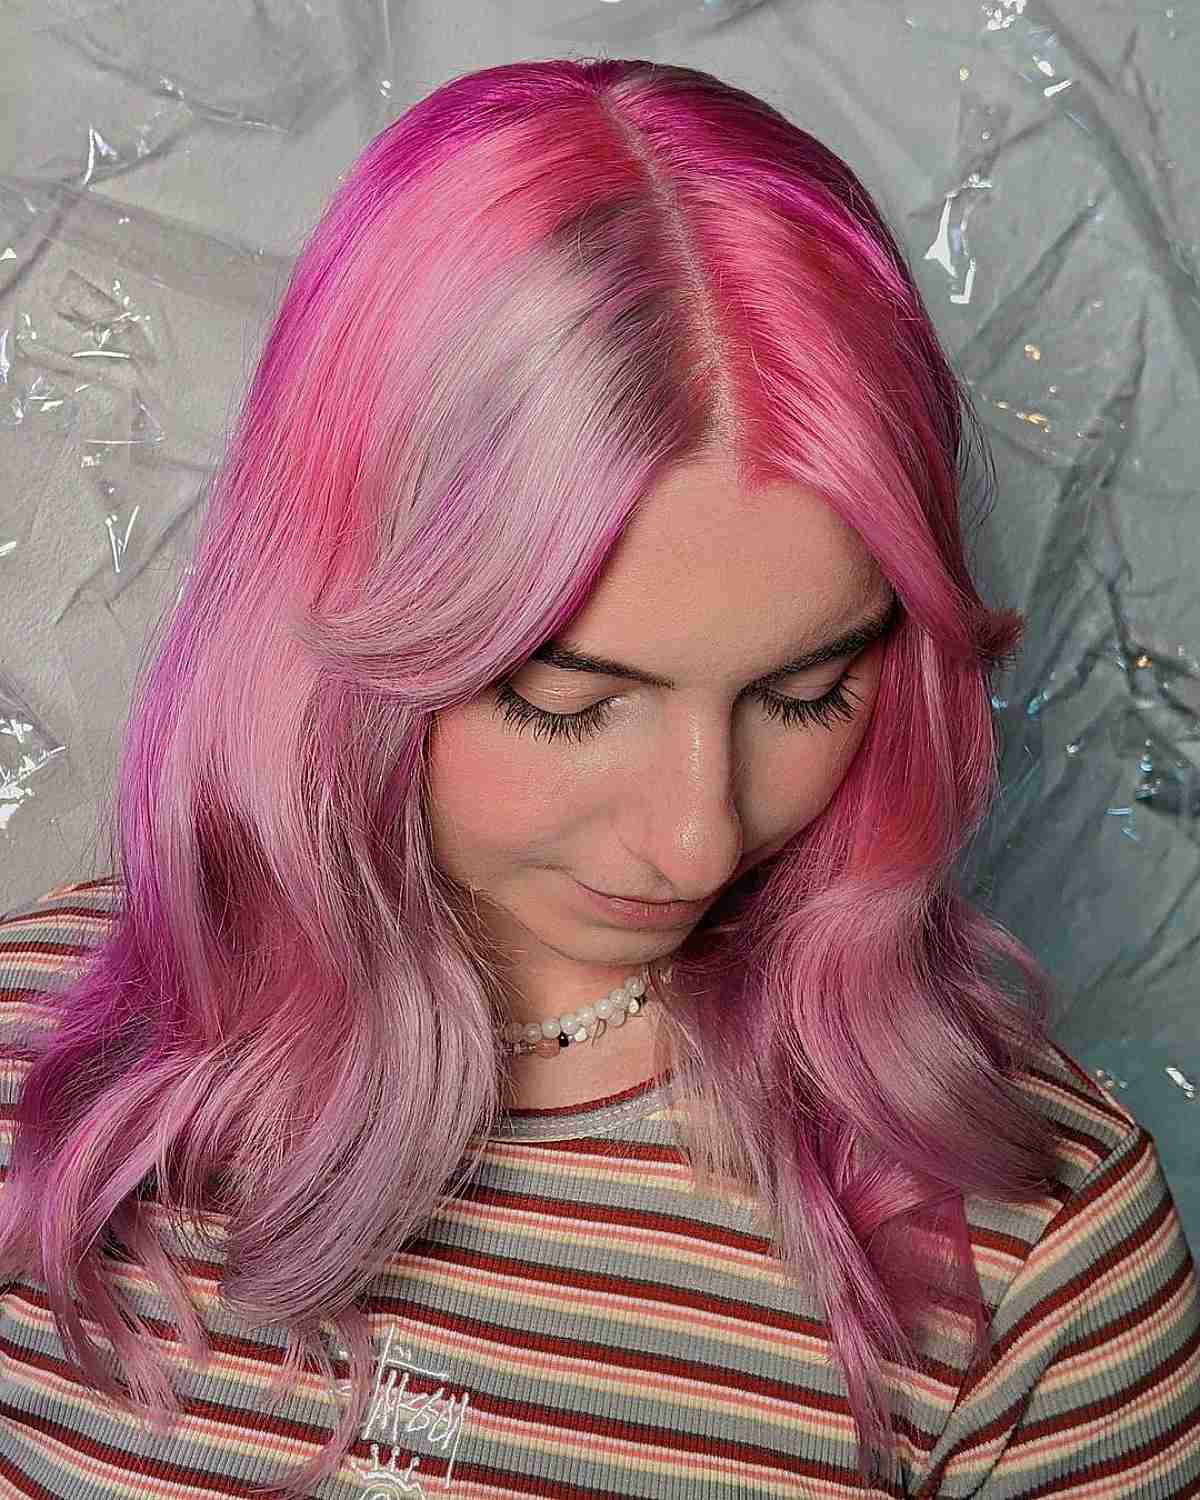 Dimensional Cotton Candy Pink Hair